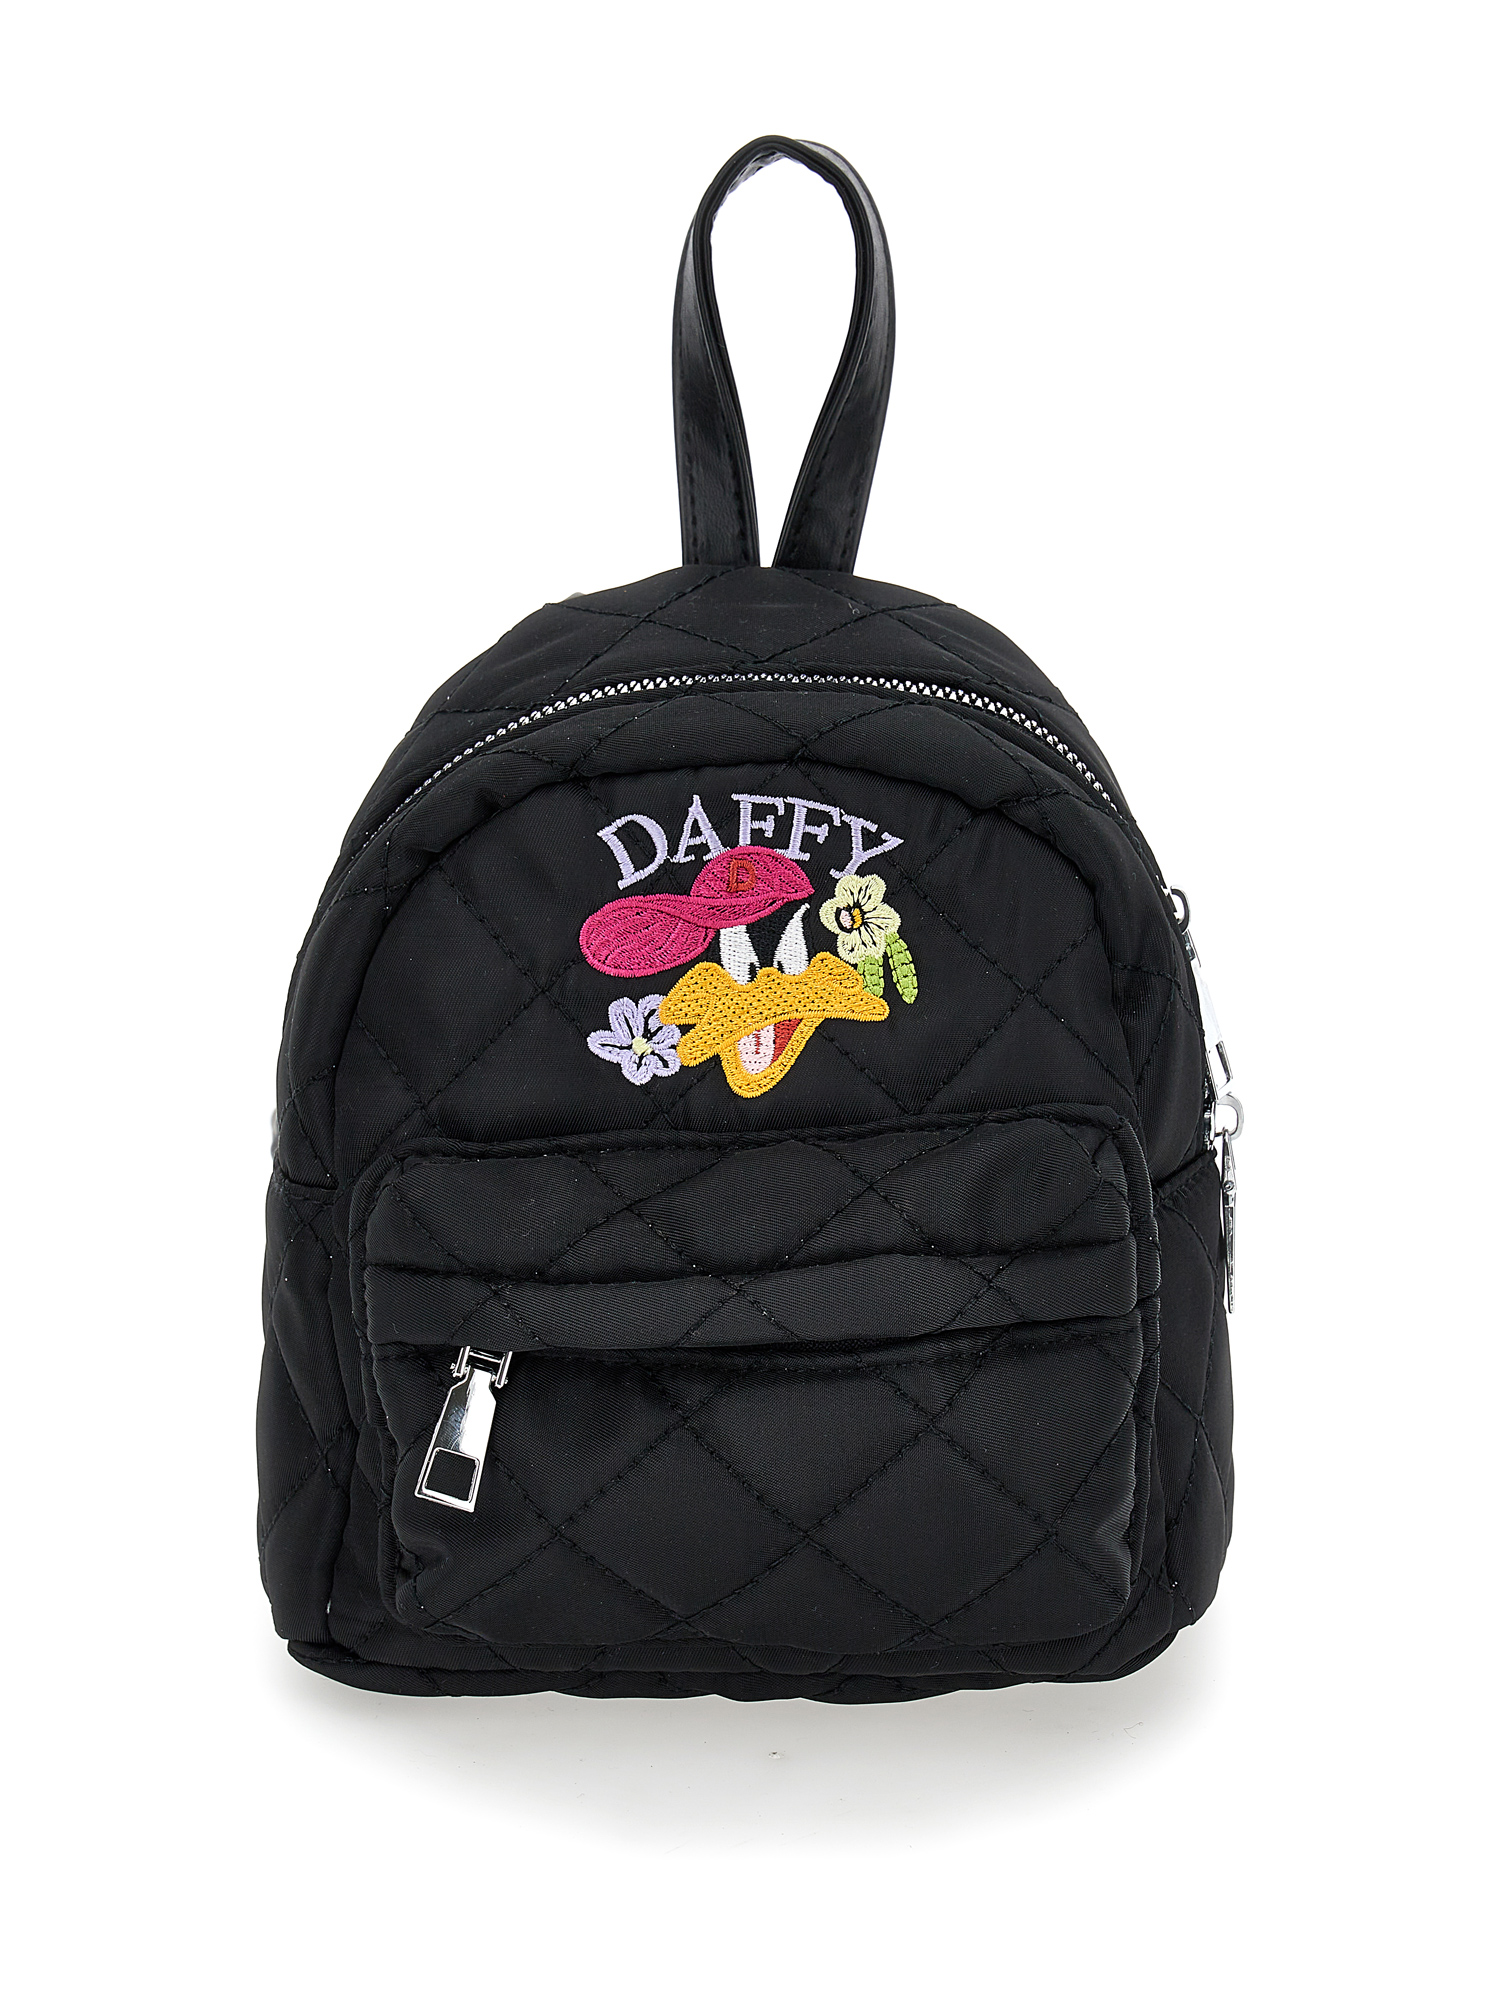 Monnalisa Daffy Duck Quilted Fabric Backpack In Black